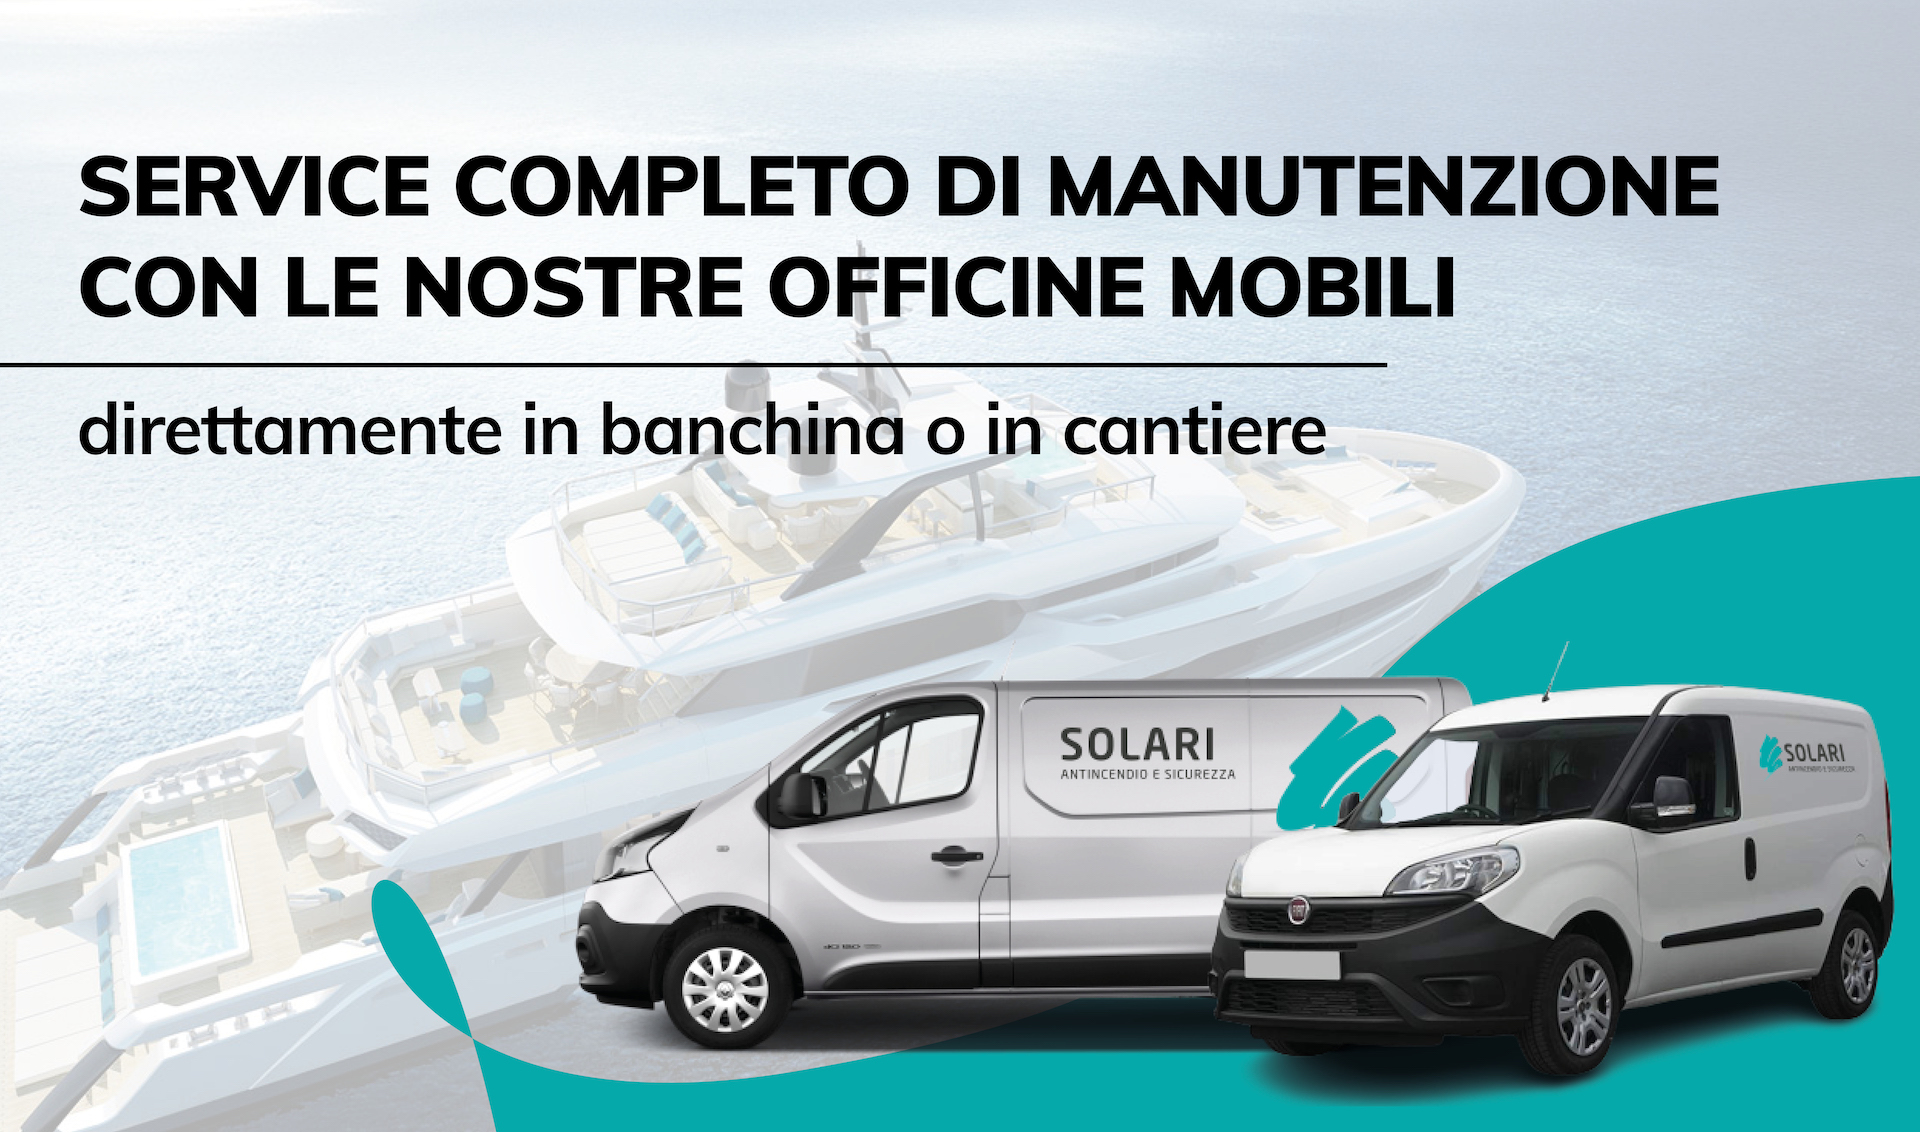 Officine mobili in banchina o cantiere